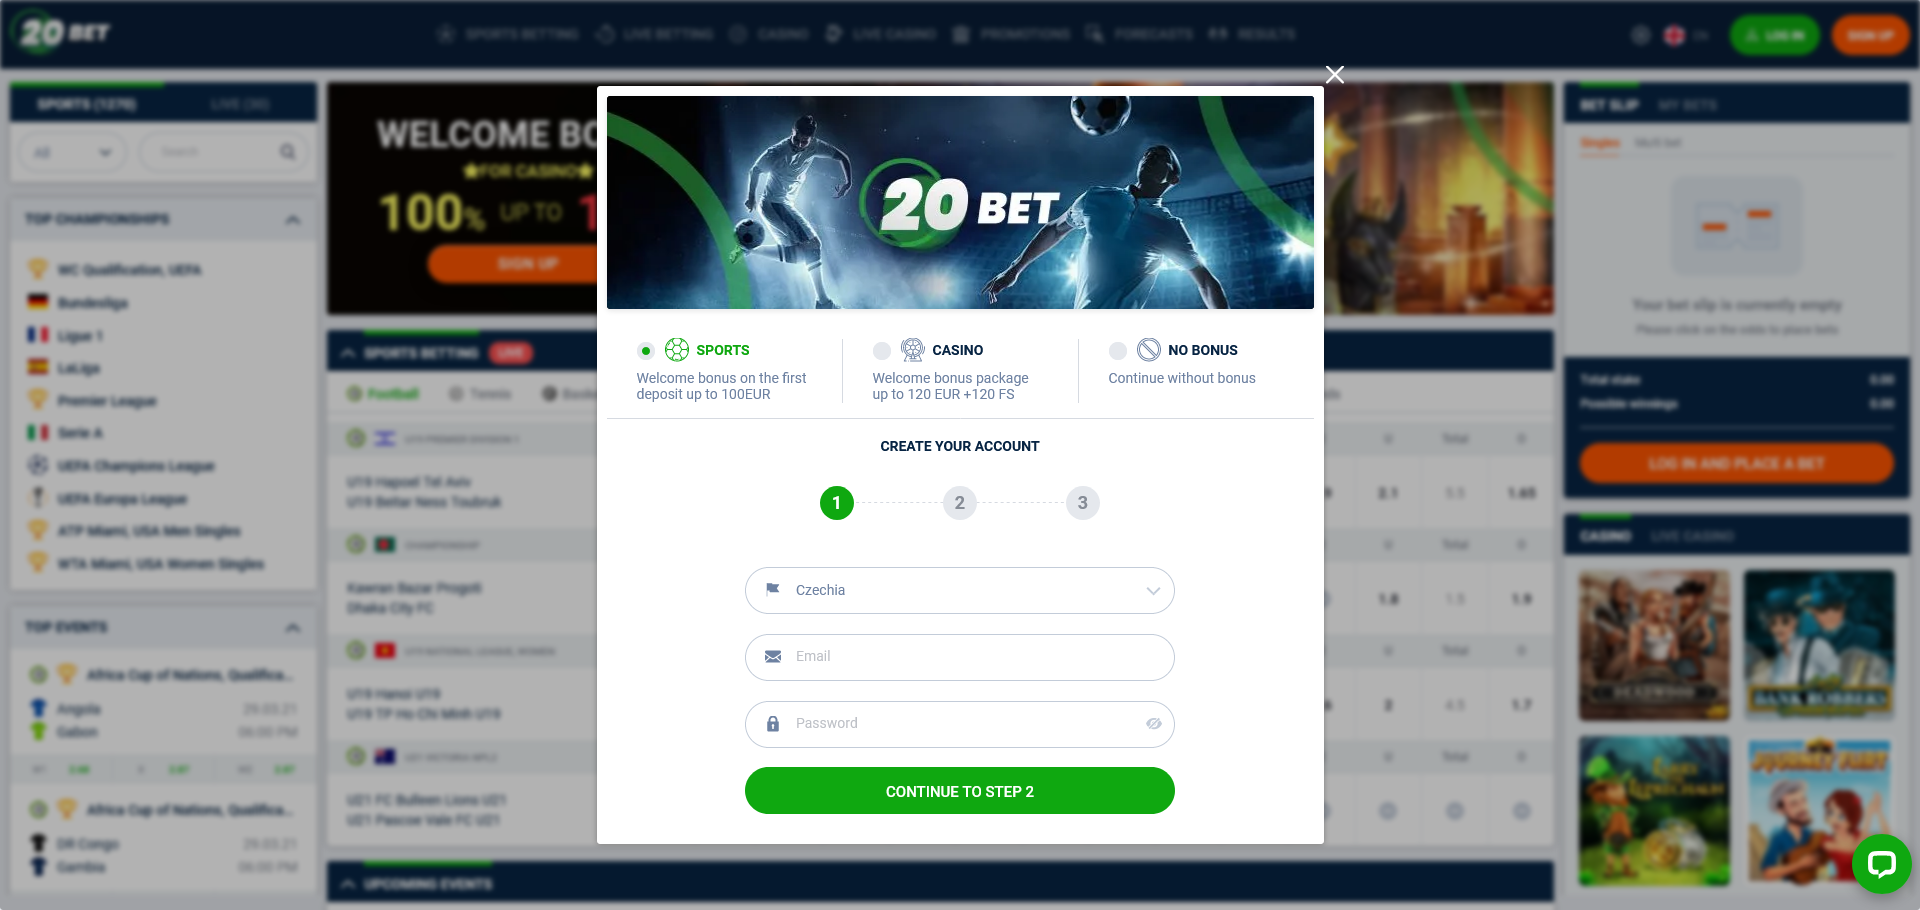 20Bet is an all-rounder solution to all your betting needs